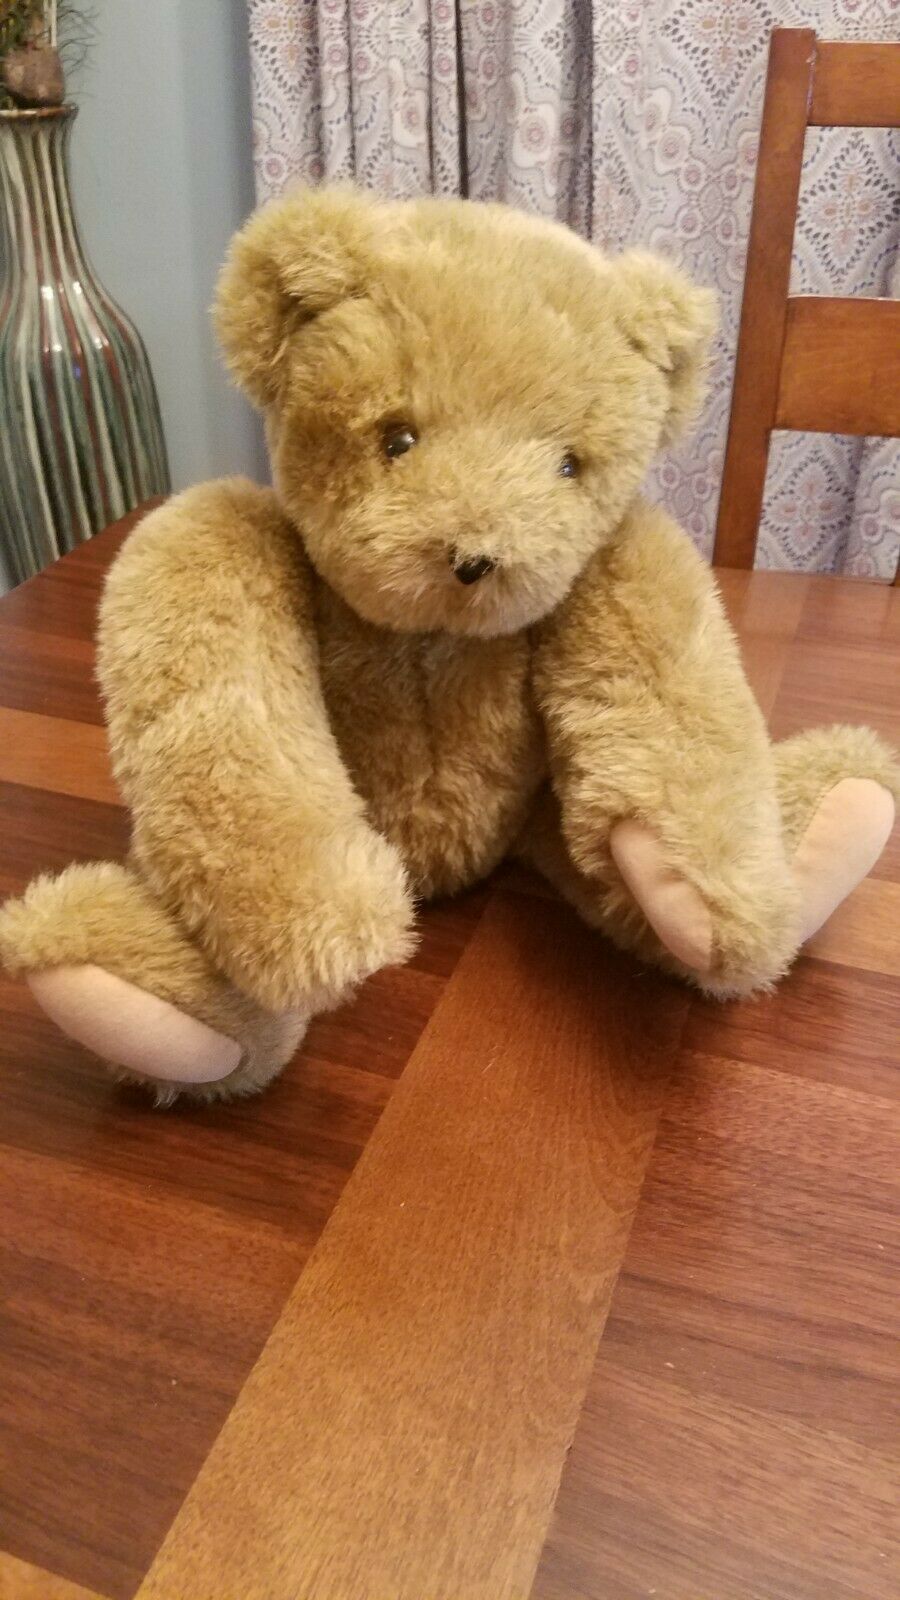 Vermont Teddy Bear Light Brown Plush Jointed 15” Handmade Authentic